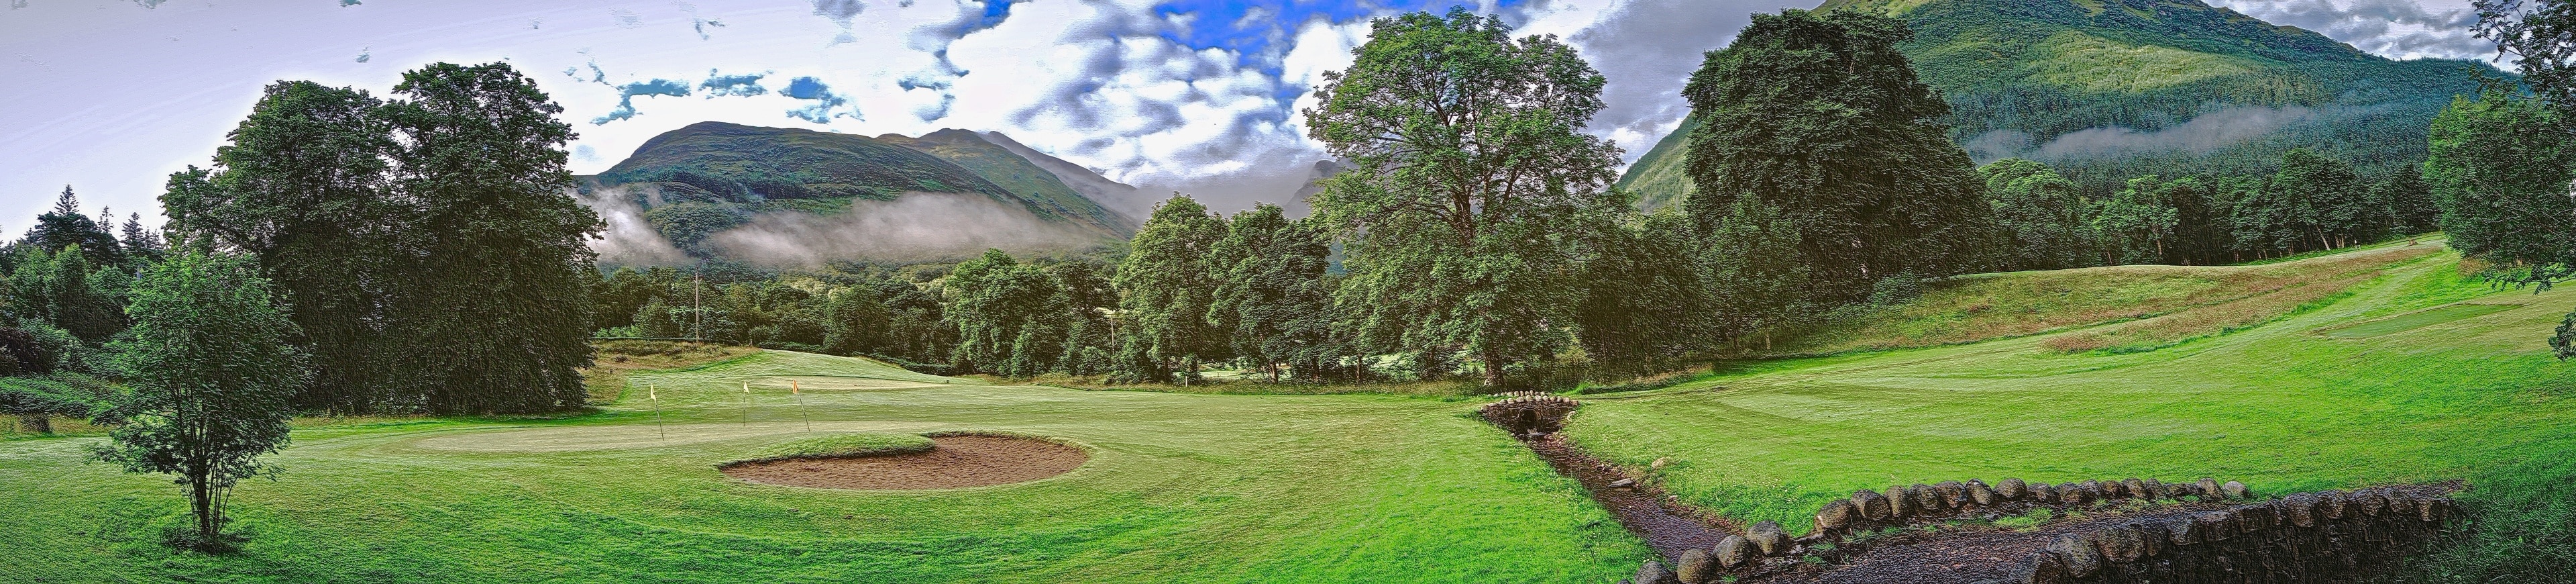 Glencoe Activities featuring The Dragon's Tooth Golf Course. SCOTLAND.